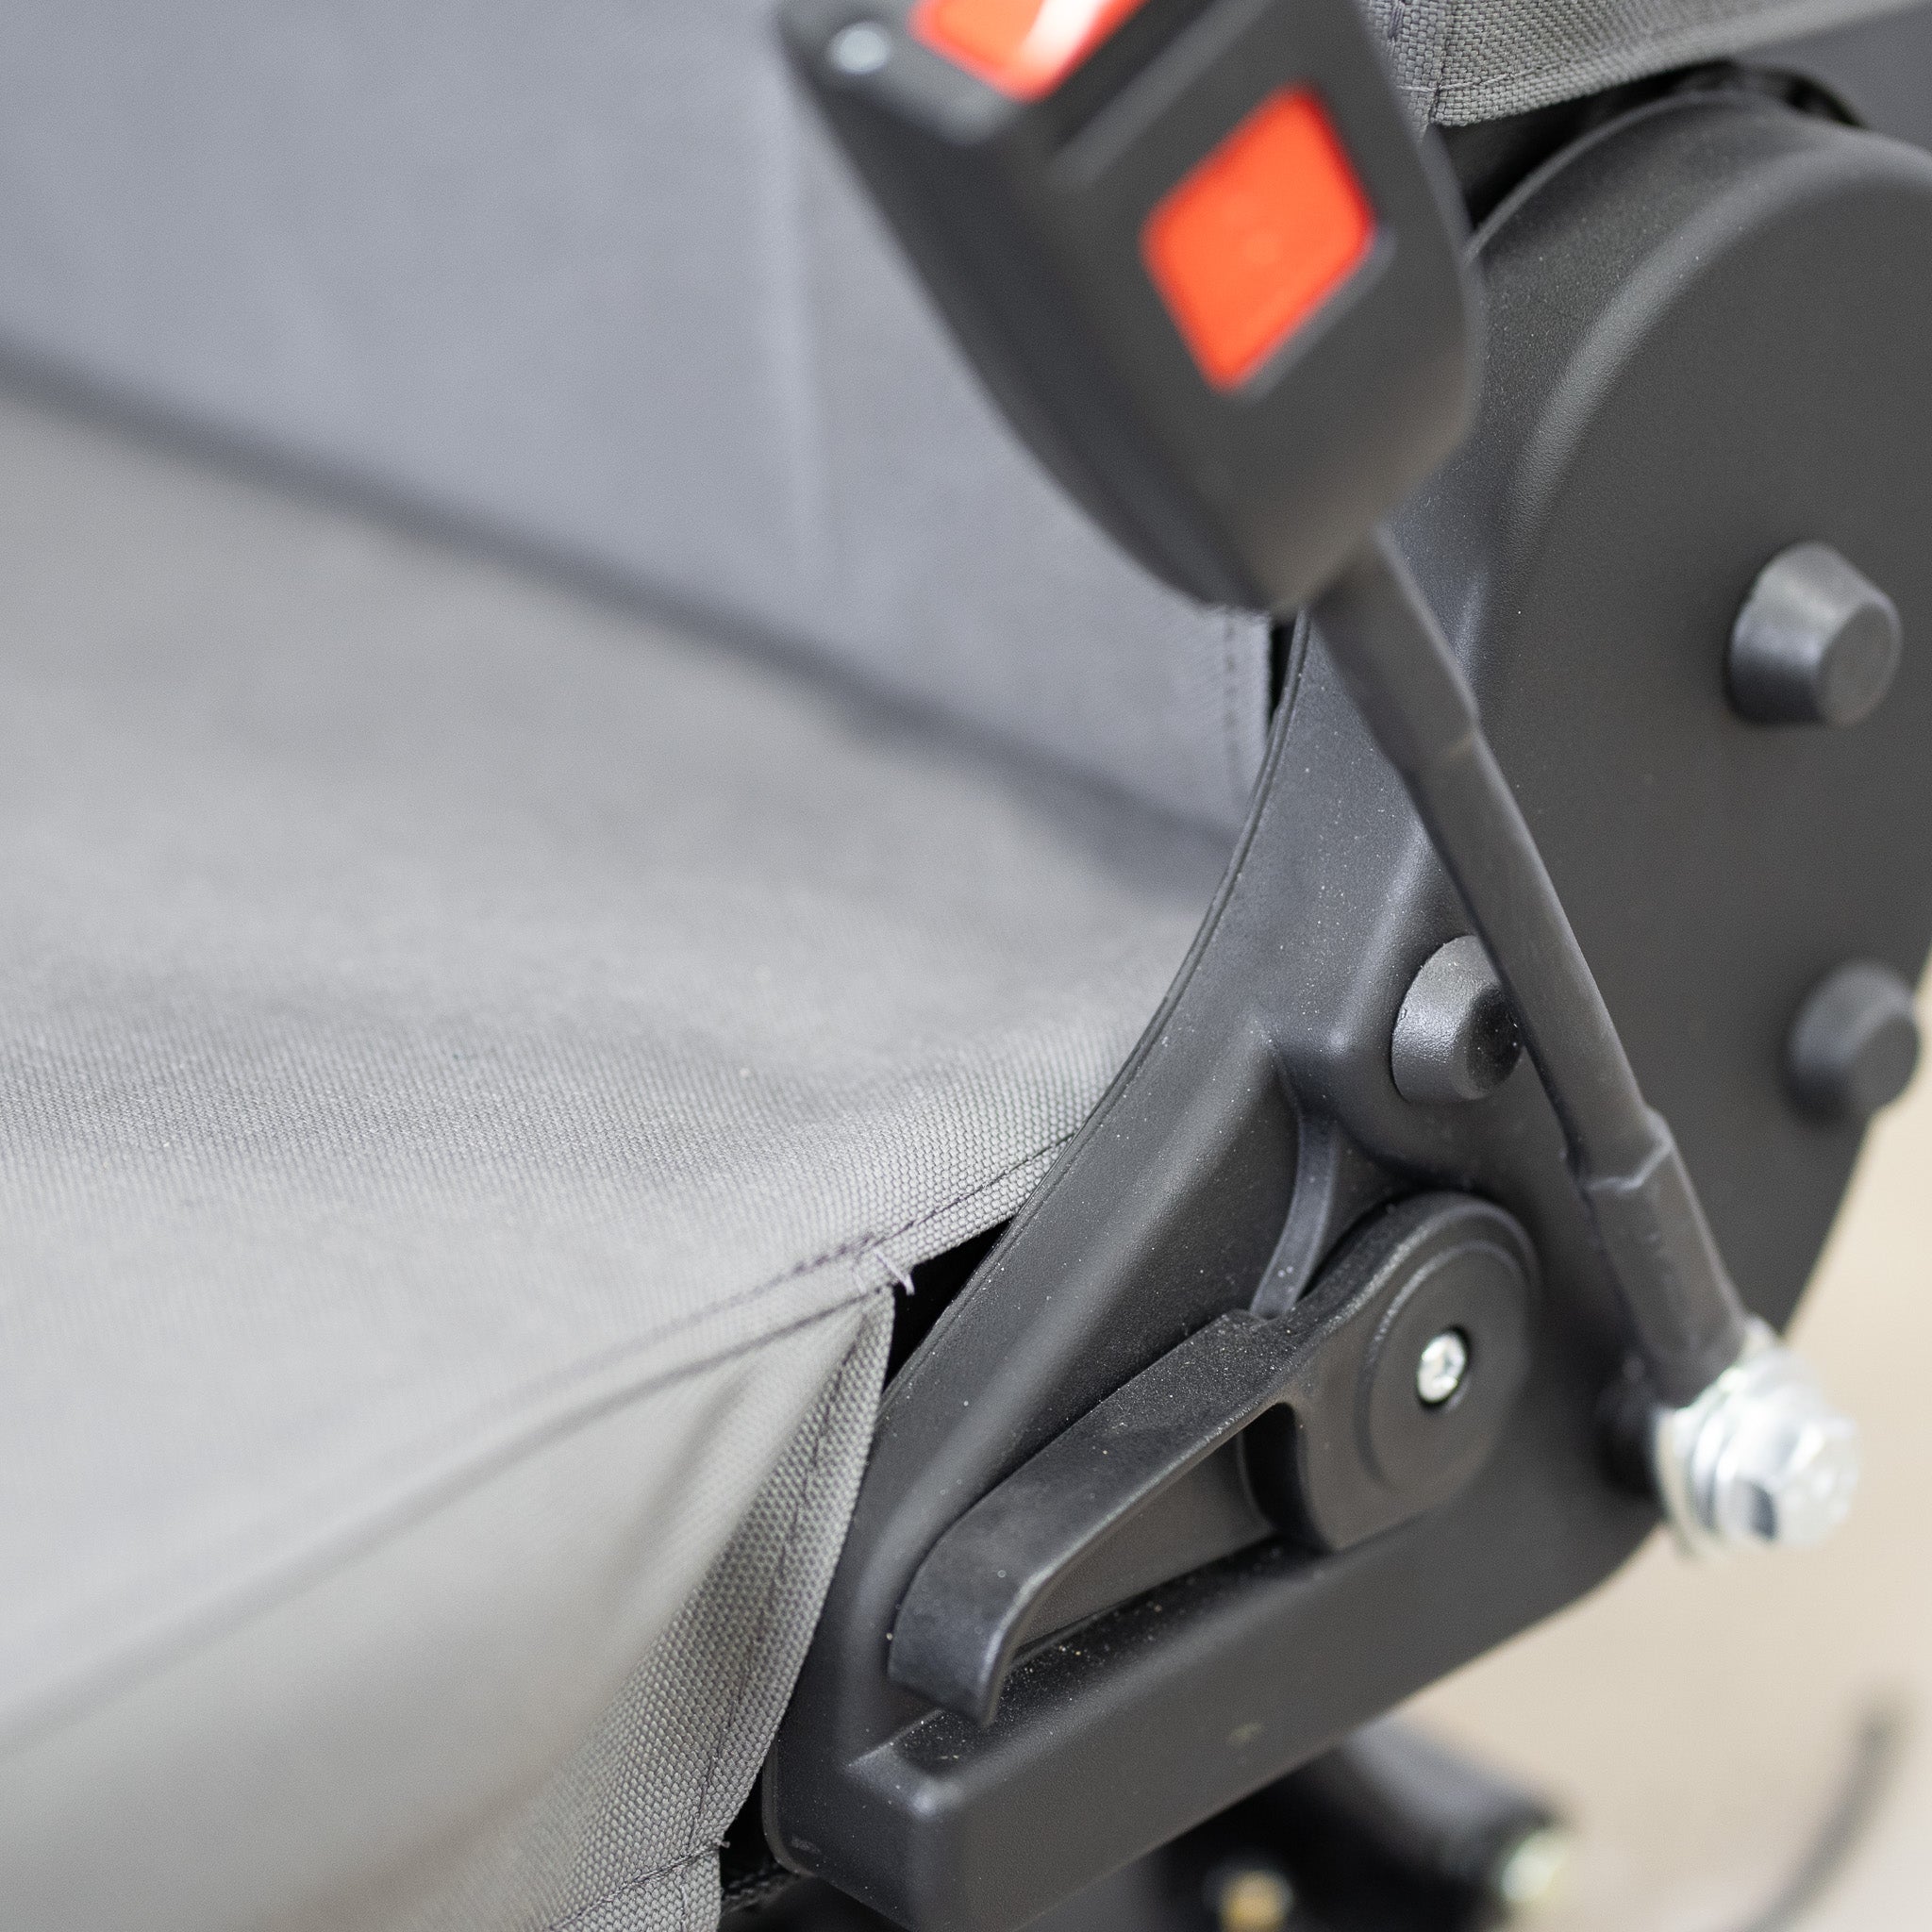 TigerTough Heavy Equipment Seat Coves are designed to work with all of the existing seat features and fit really well around things like plastic trim and edges.